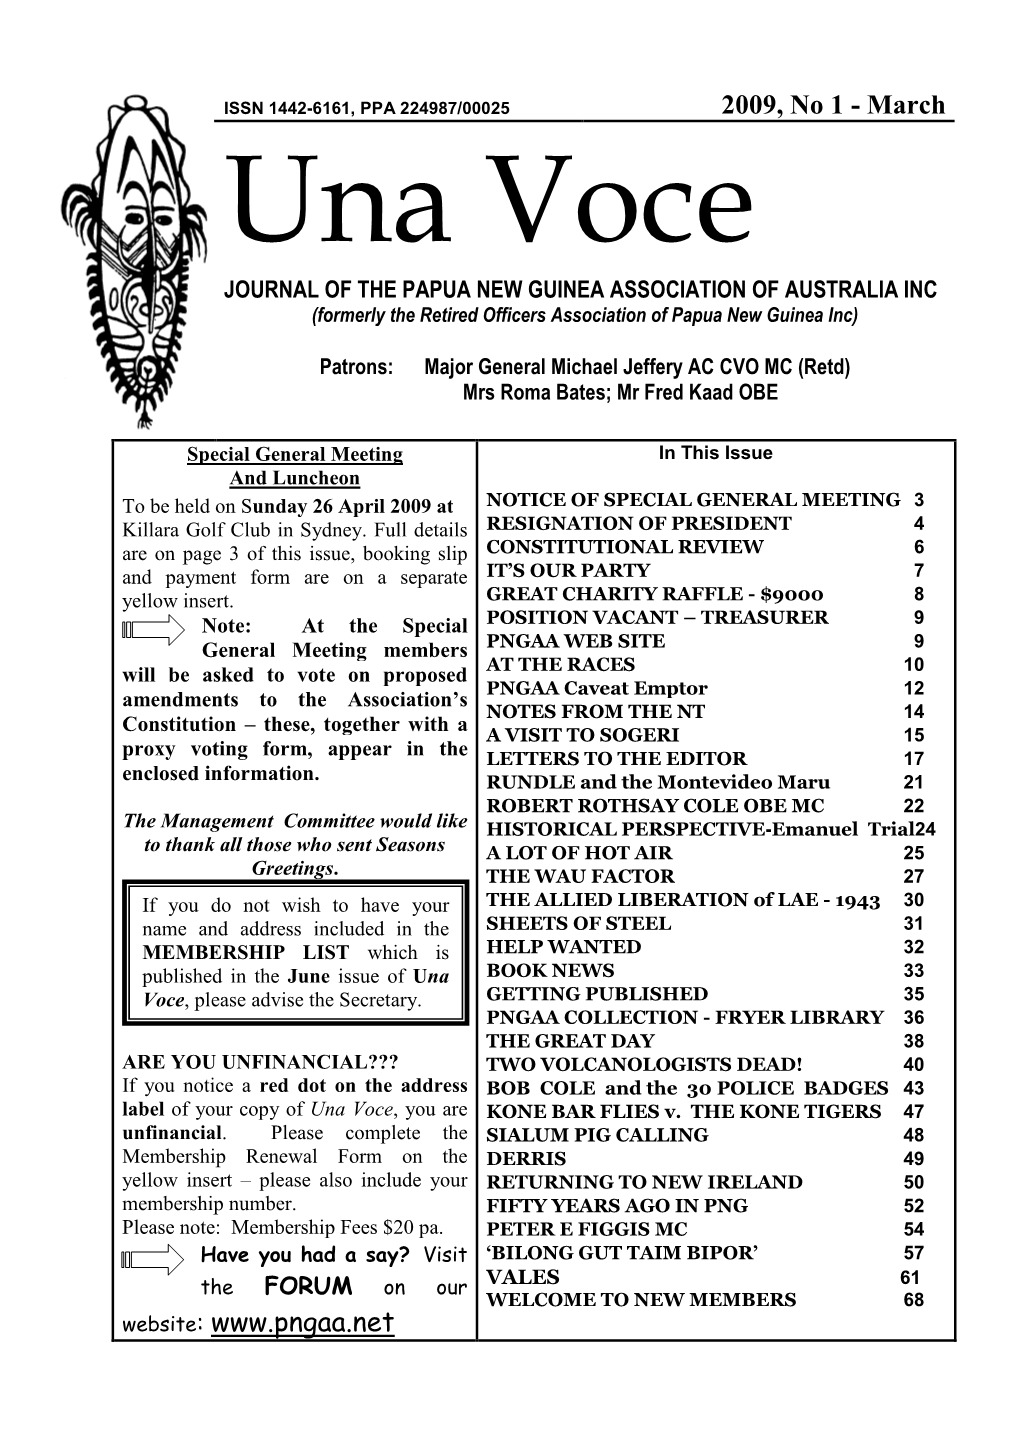 2009, No 1 - March Una Voce JOURNAL of the PAPUA NEW GUINEA ASSOCIATION of AUSTRALIA INC (Formerly the Retired Officers Association of Papua New Guinea Inc)